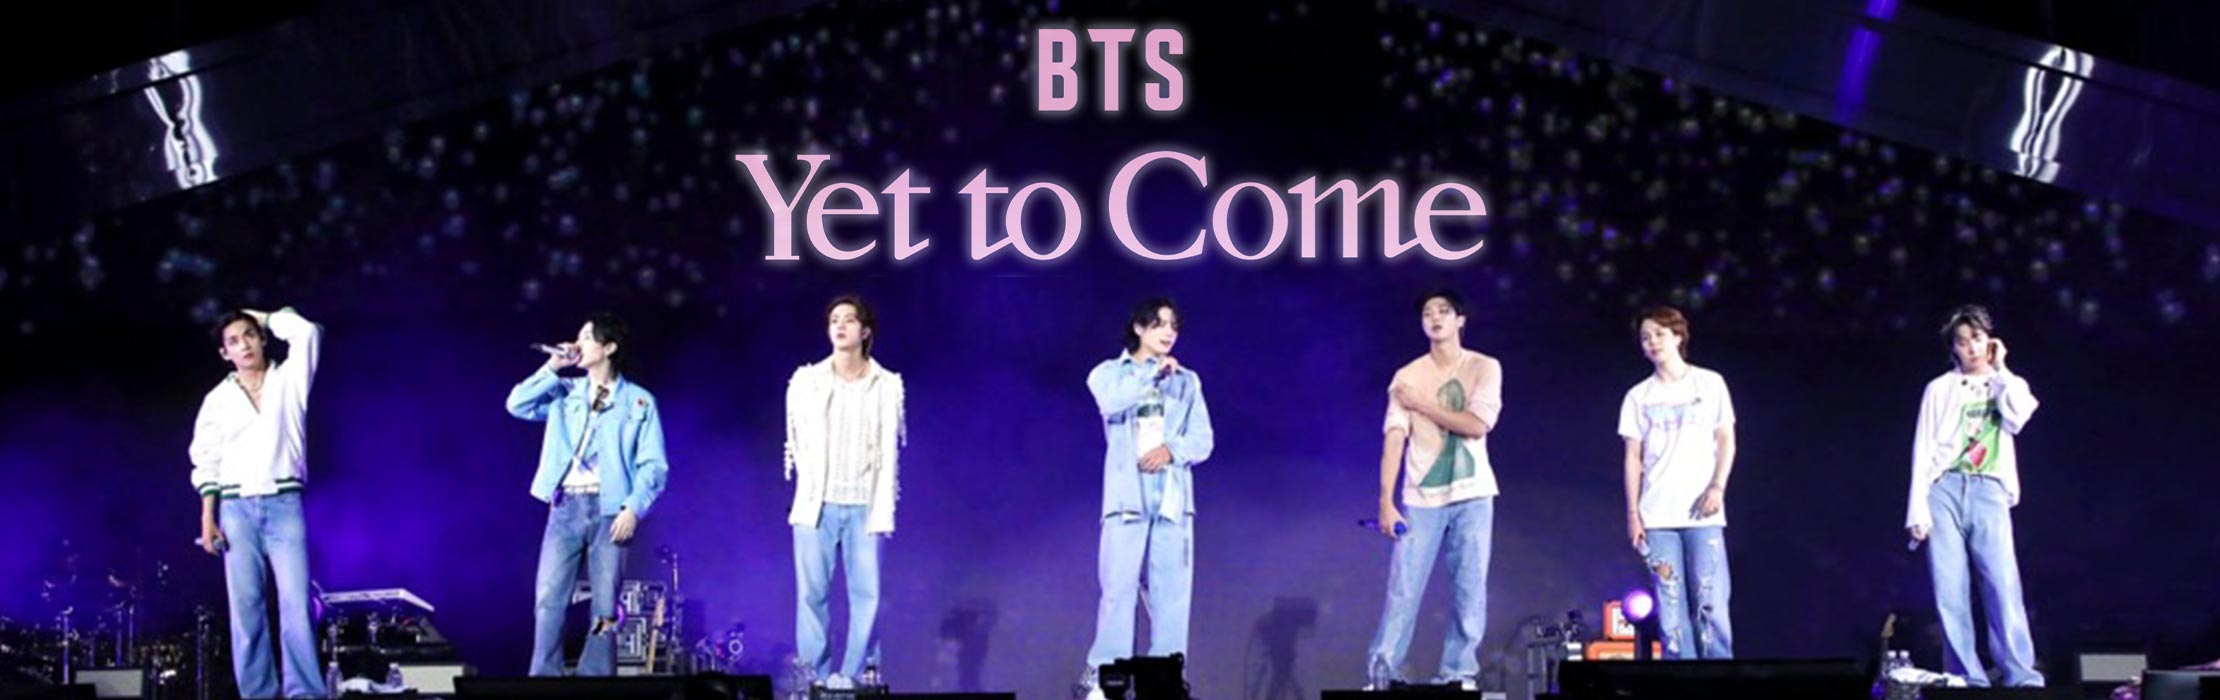 BTS: Yet To Come